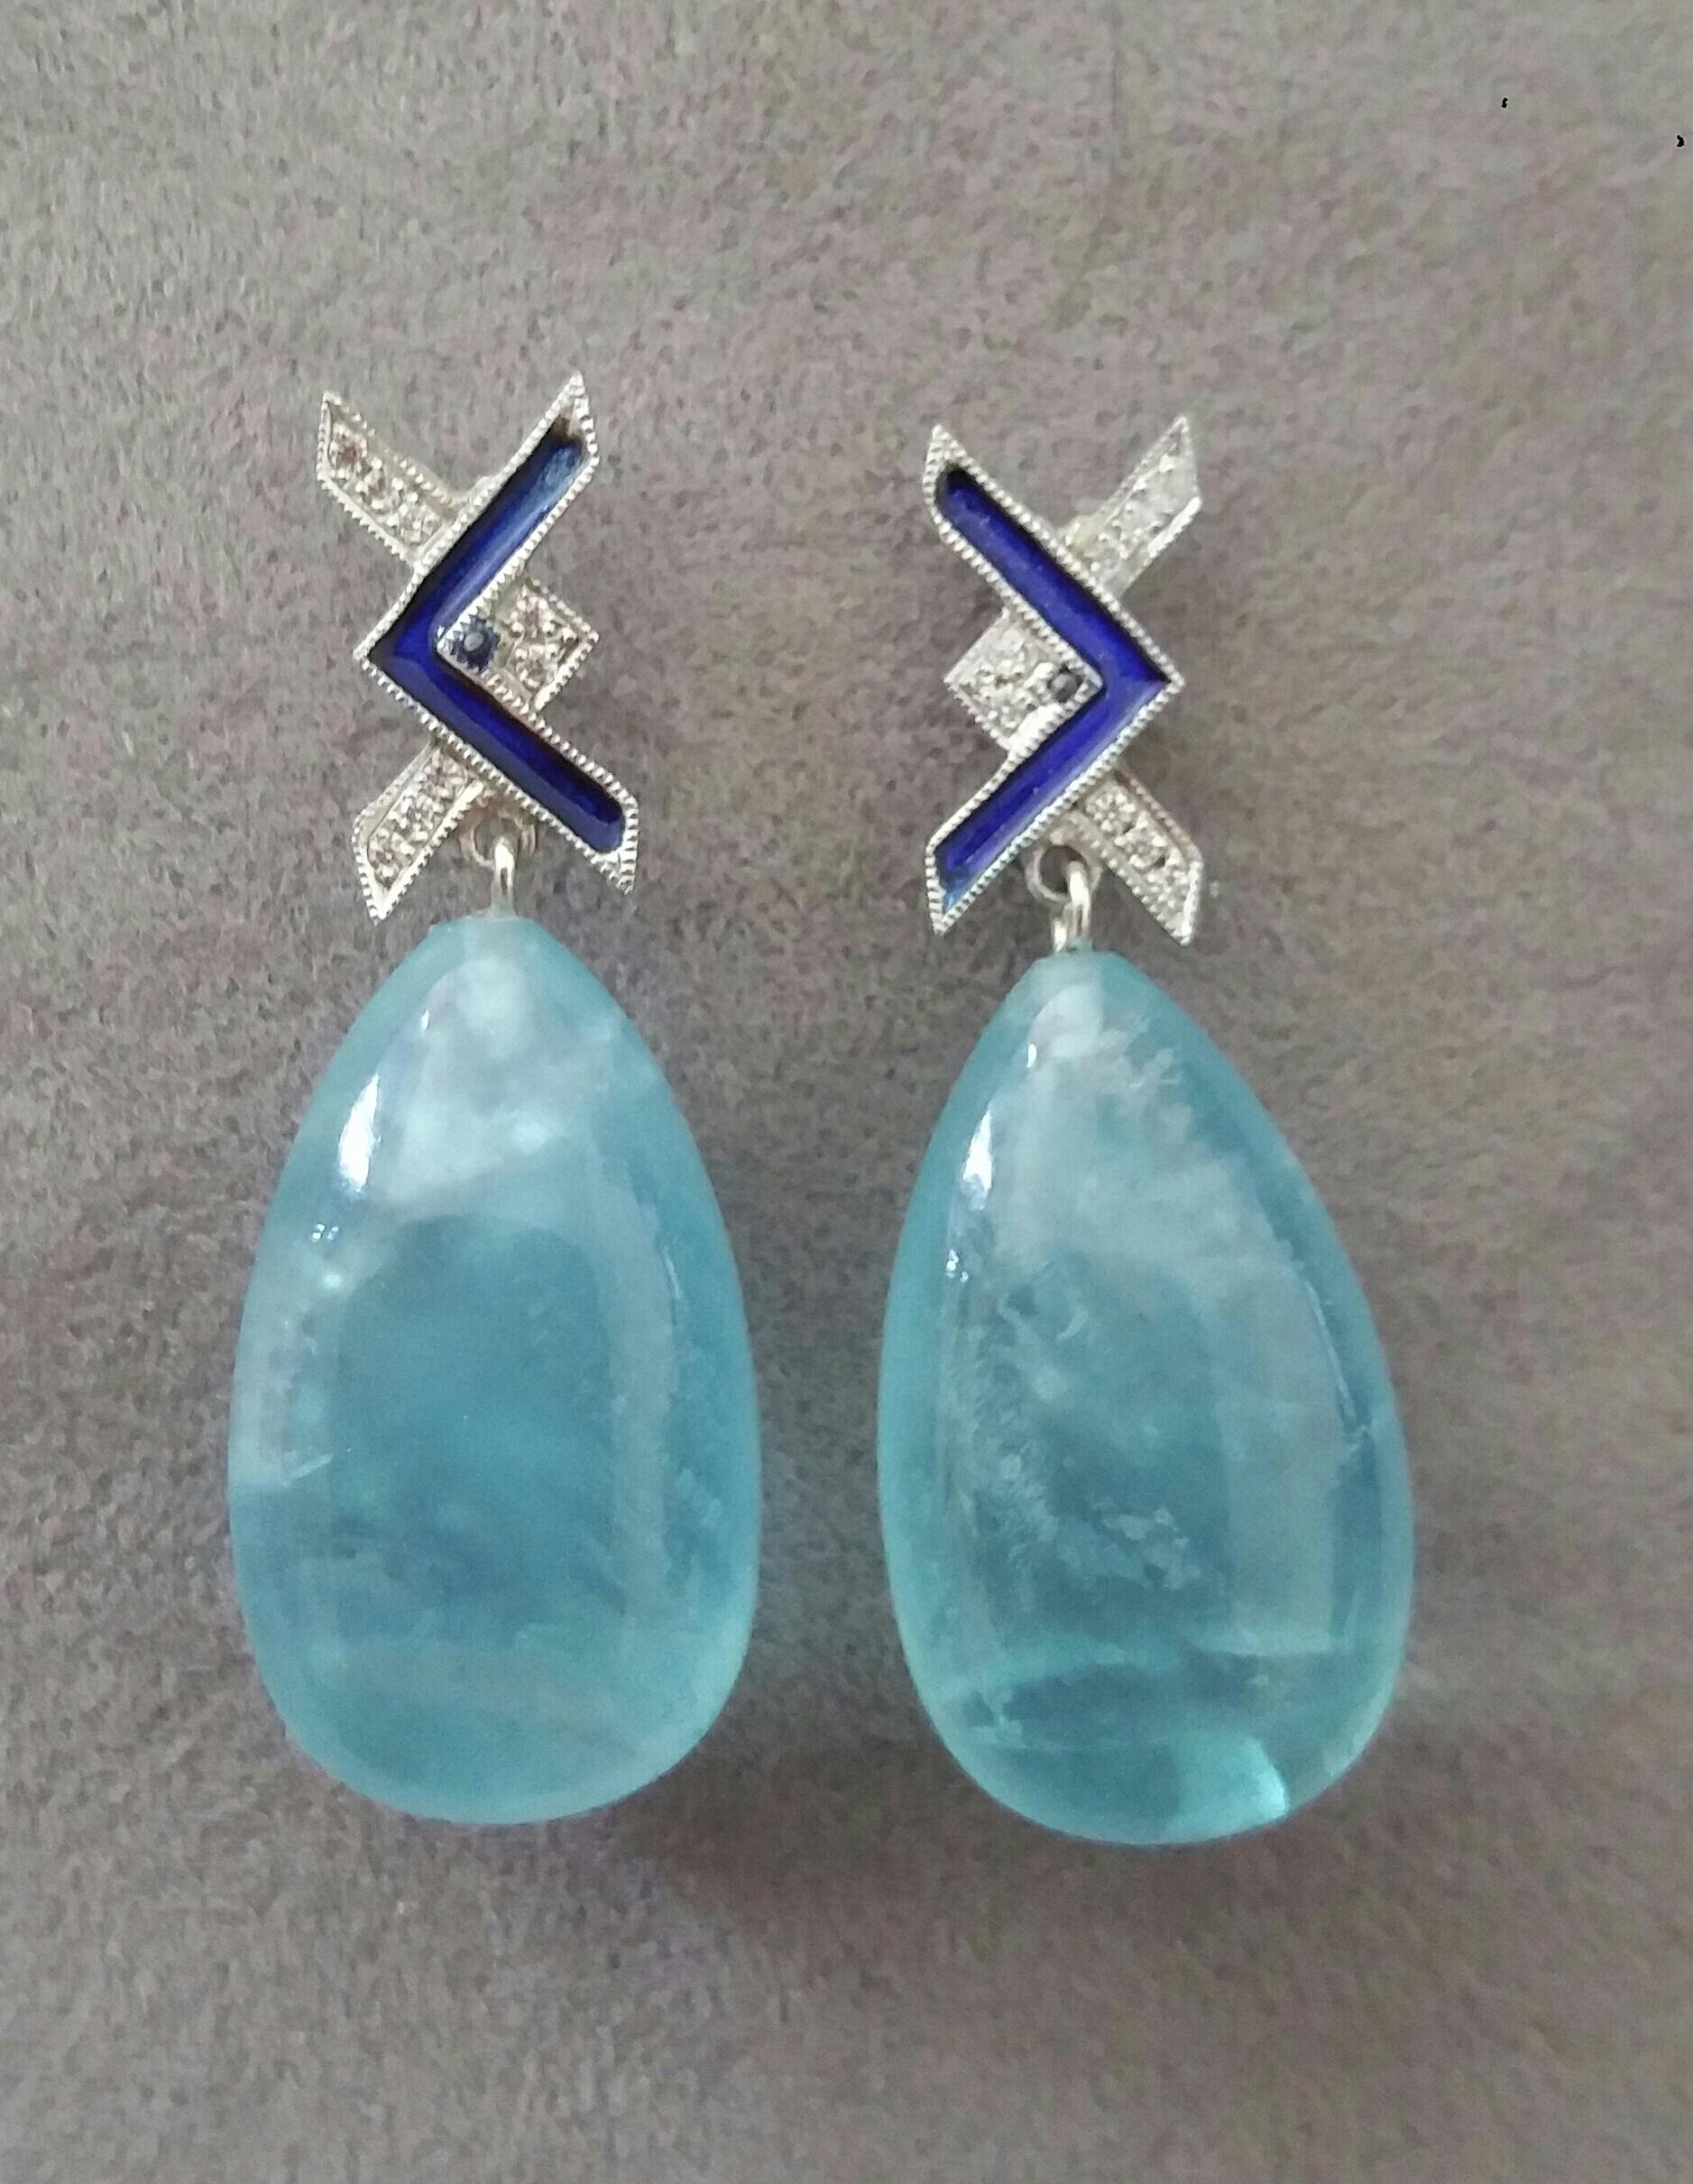 In these Art Deco Style handmade earrings 2 very good quality Natural Aquamarine plain drops measuring 14 x 23 mm. are suspended from 2 white 14 kt gold tops  with 16 full cut round diamonds and blue Enamels.

In 1978 our workshop started in Italy